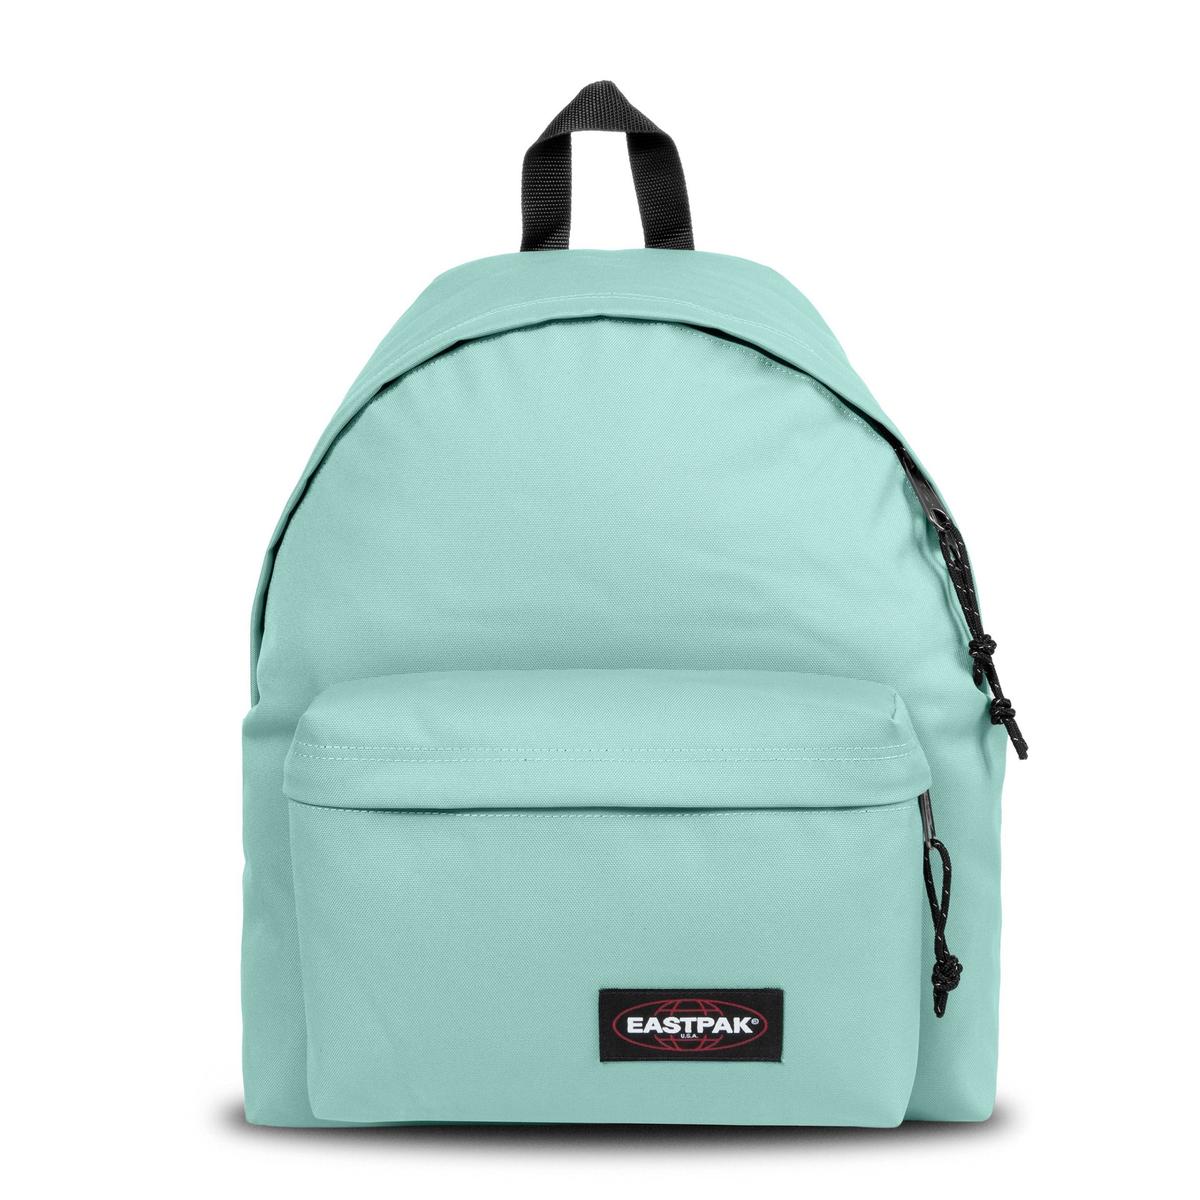 Eastpak Padded Though Turquois